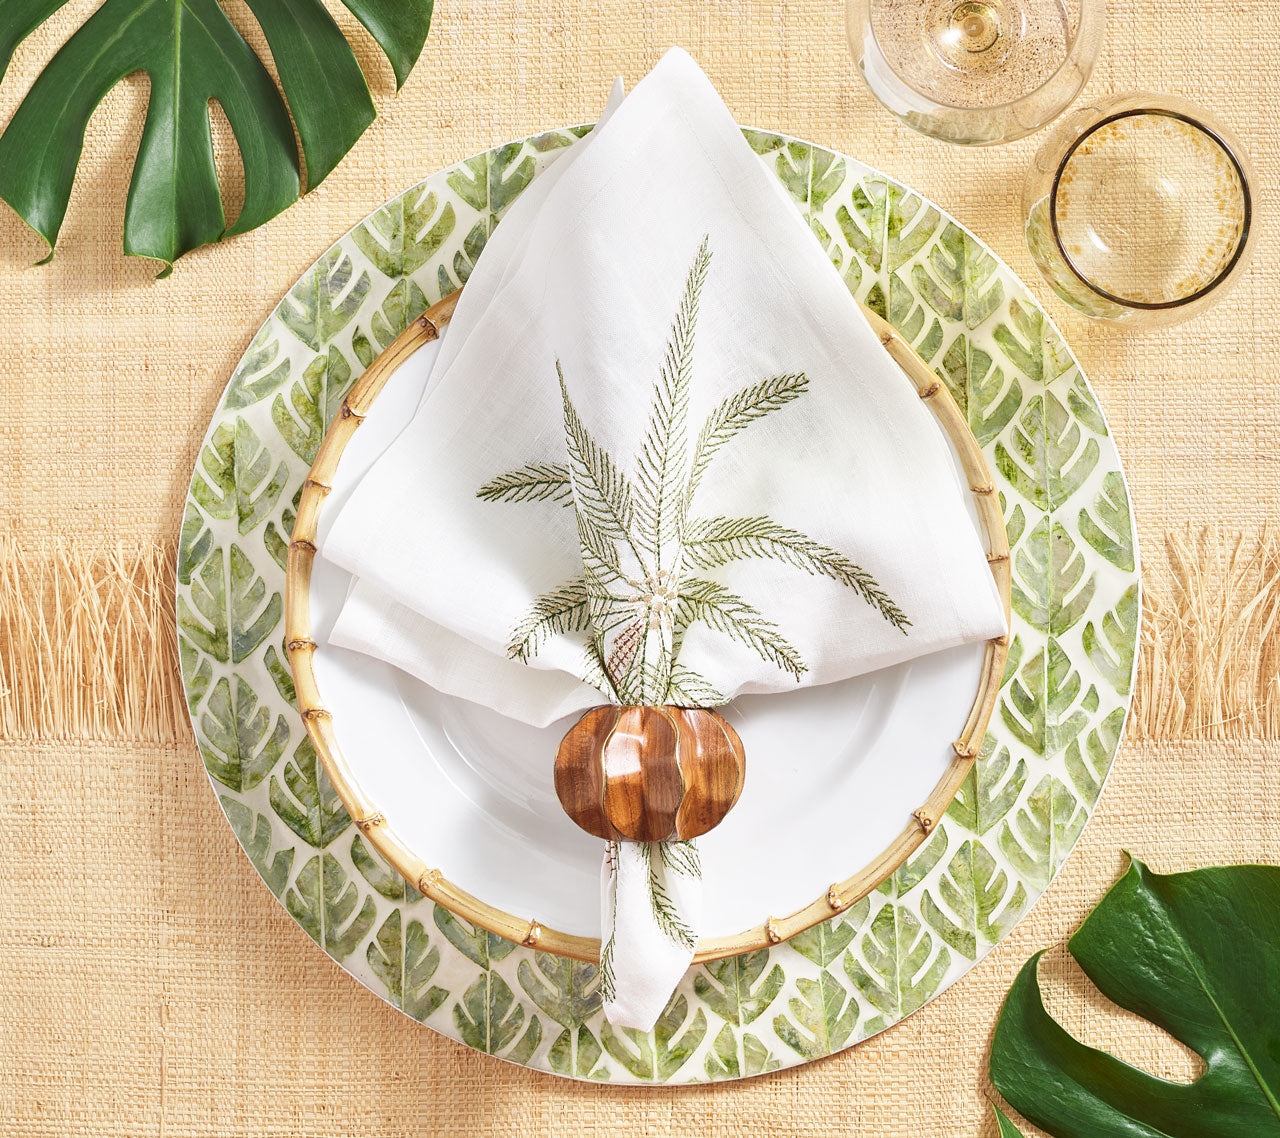 Fern Placemat in ivory & green underneath a bamboo-rimmed plate and white napkin with greenery